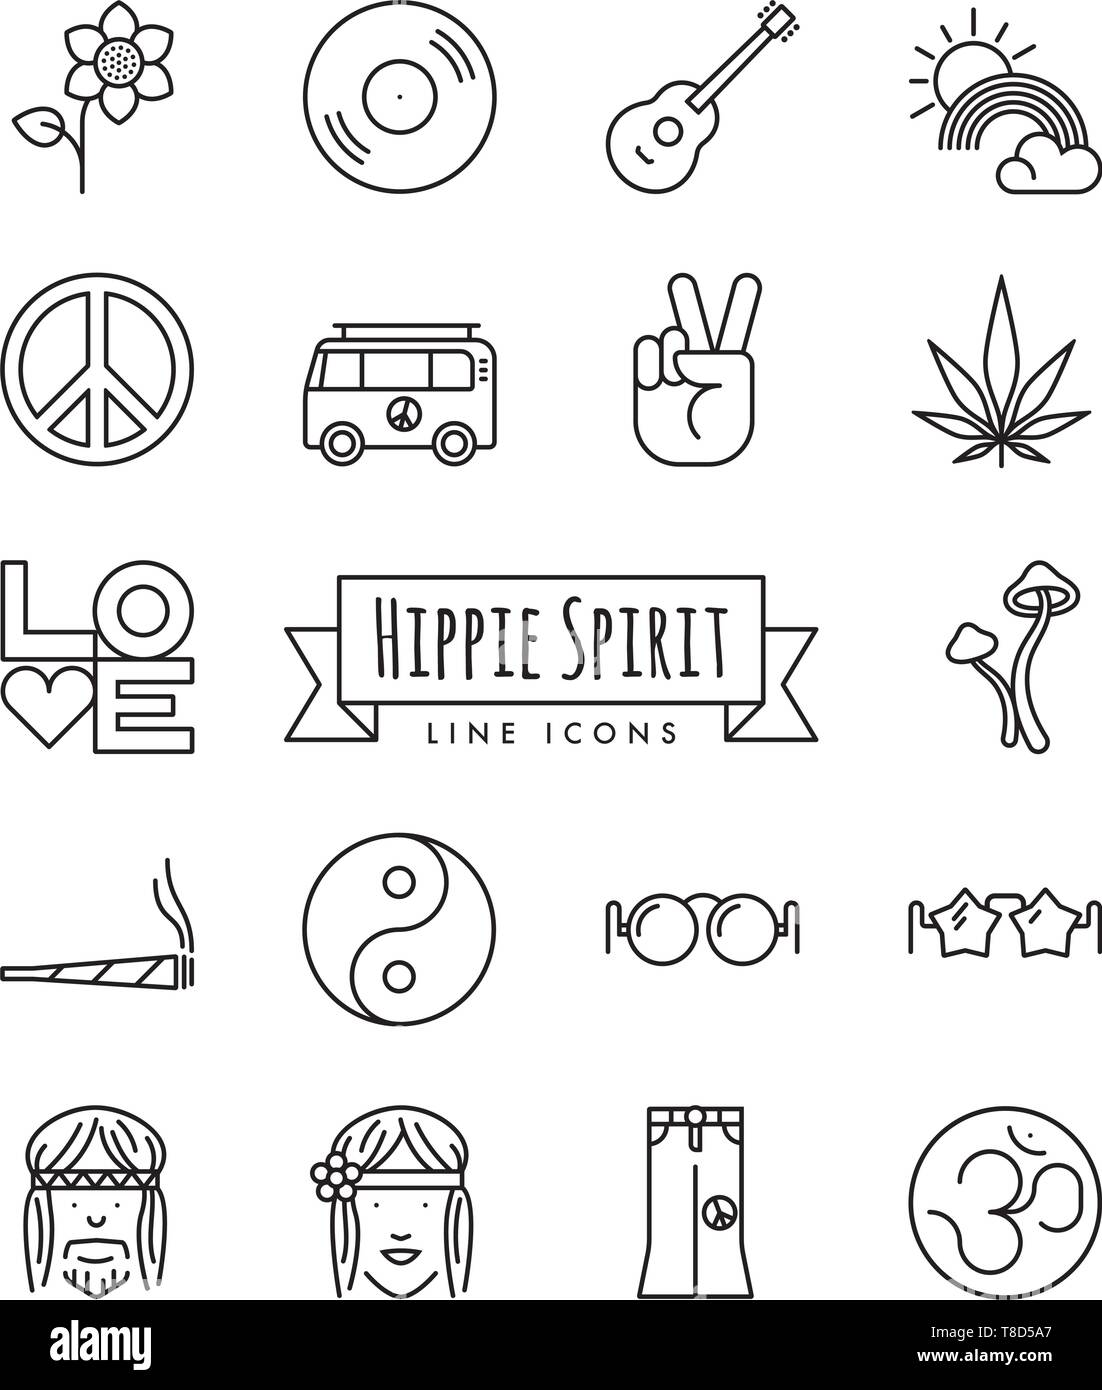 Hippie spirit line icons set. Collection of Hippie lifestyle and accessories symbols vector illustration. Stock Vector